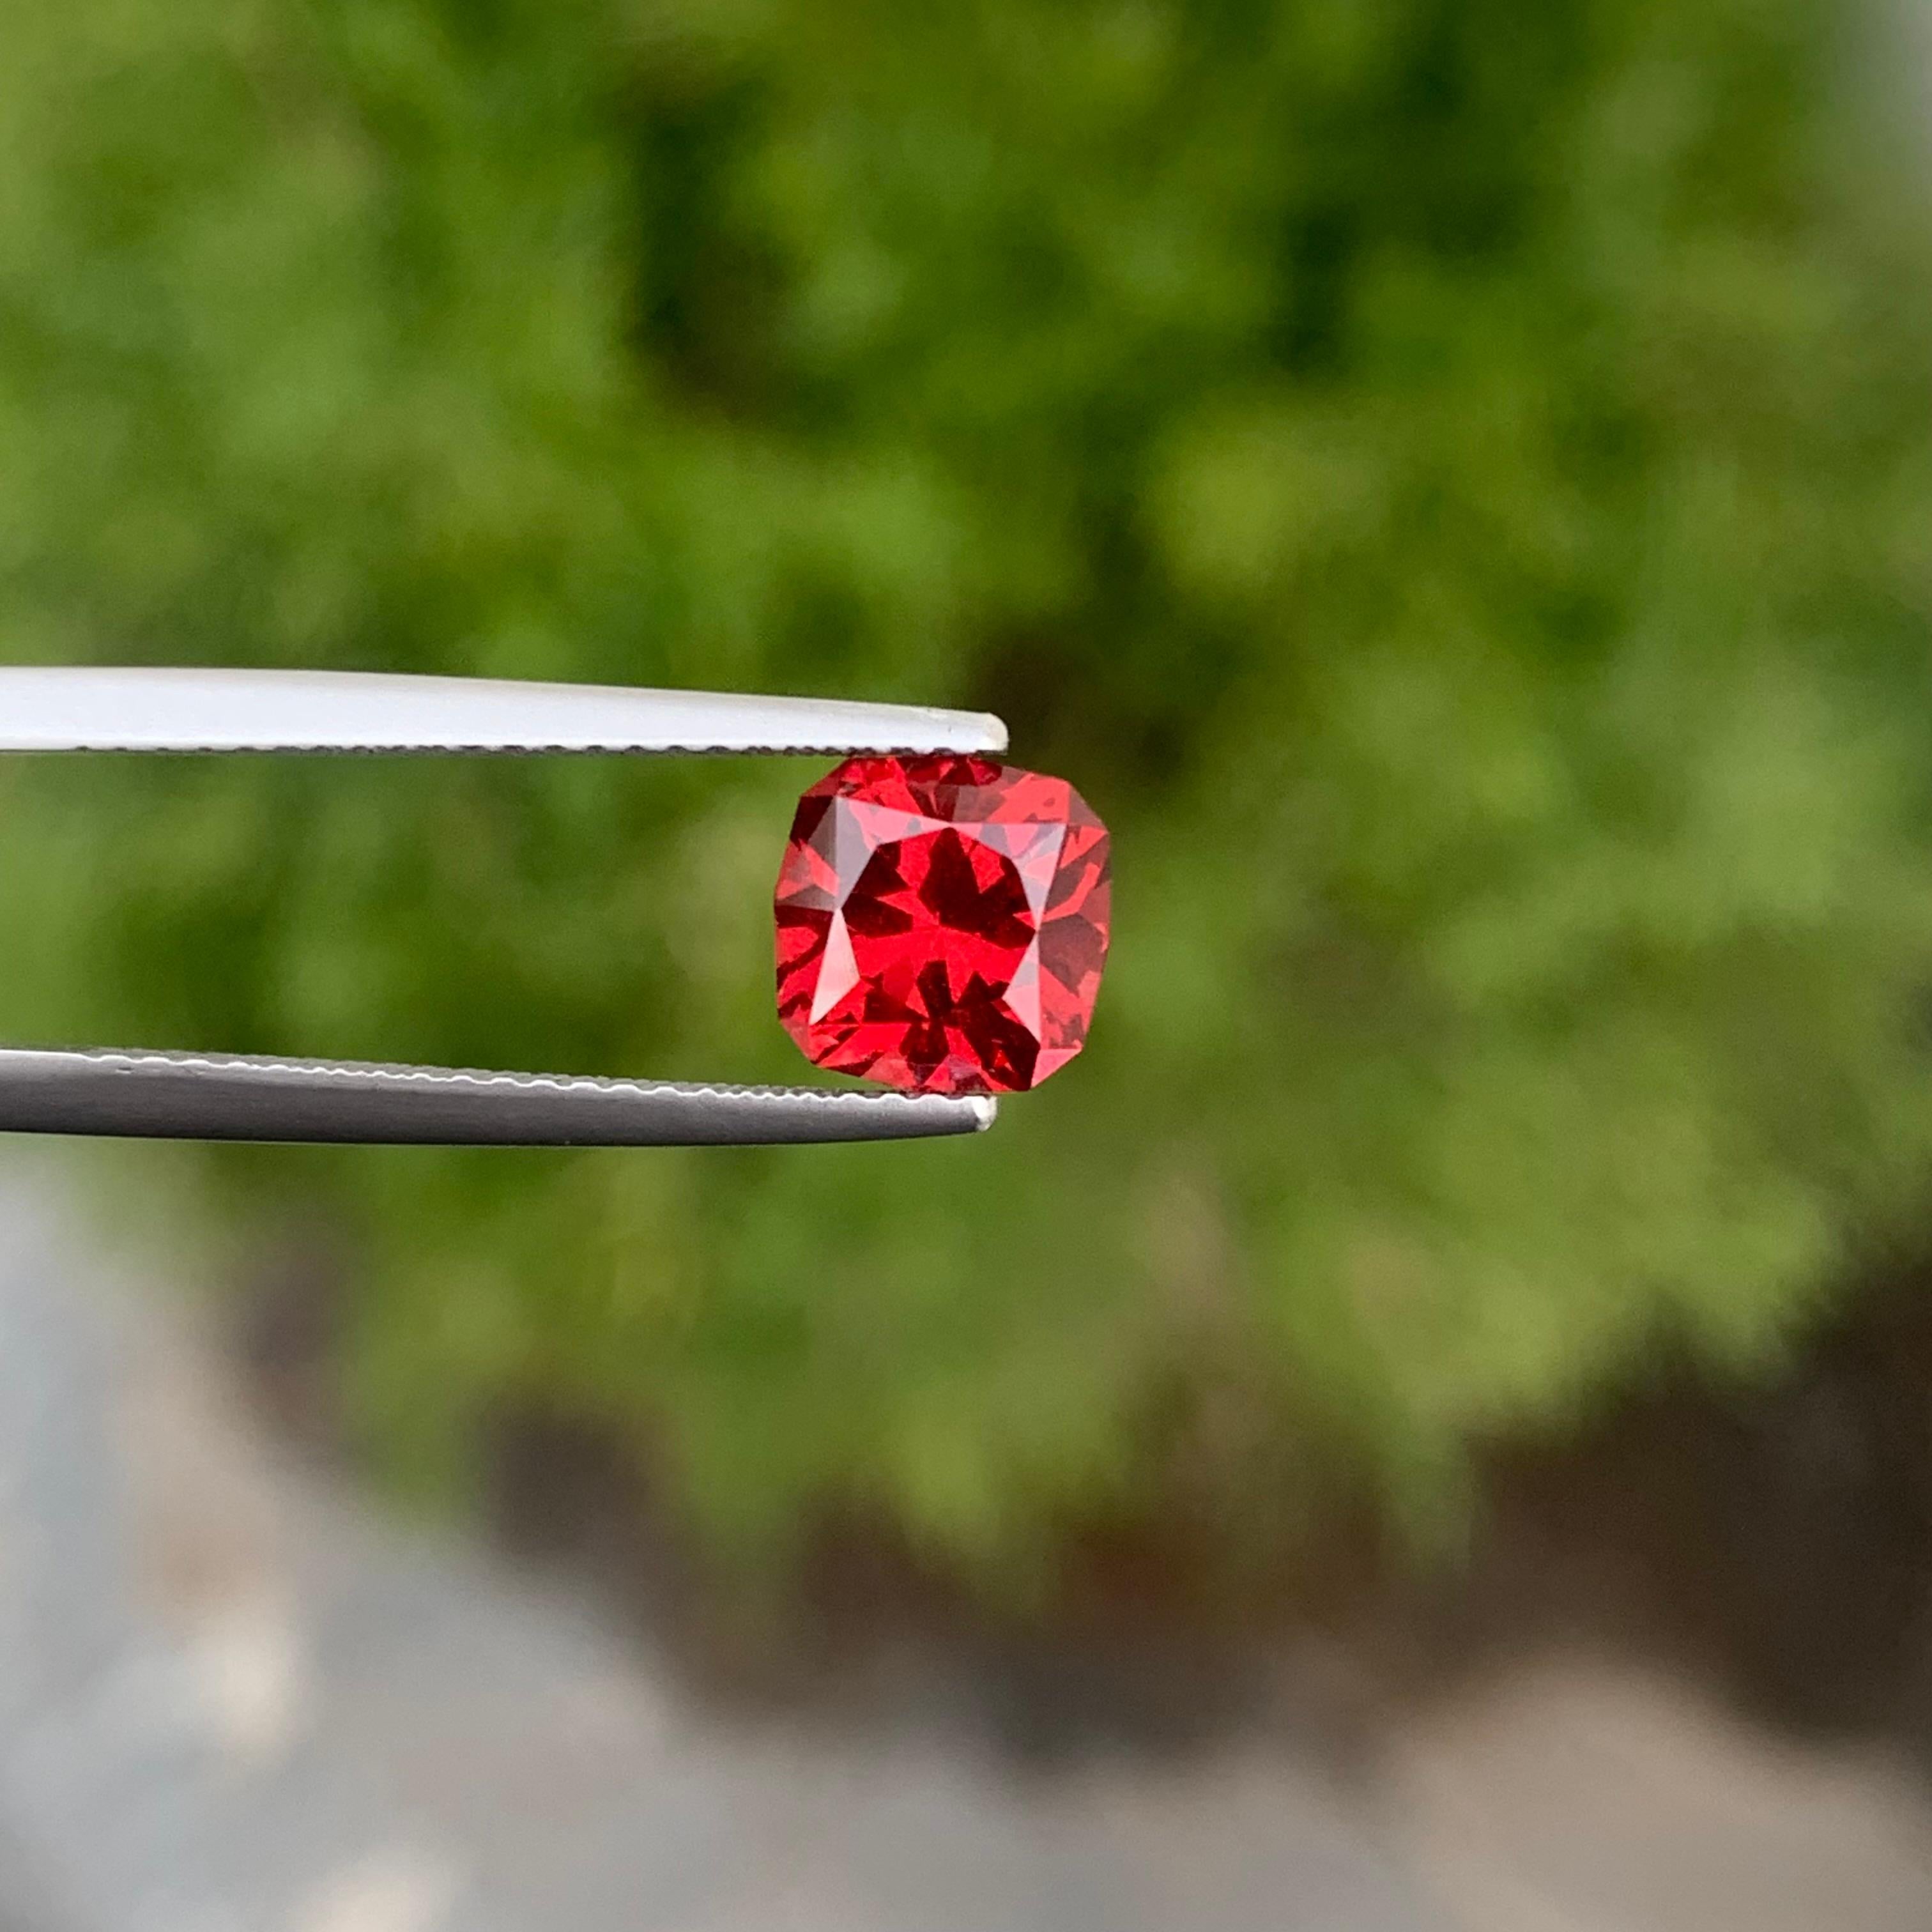 Loose Rhodolite Garnet
Weight : 2.10 Carats
Dimensions : 7.1x7.1x5.1 Mm
Origin : Tanzania Africa
Clarity : AAA Eye Clean
Shape: Cushion
Cut: Fancy
Certificate: On Demand
Treatment: Non
Color: Red
Rhodolite is a mixture of pyrope and almandite